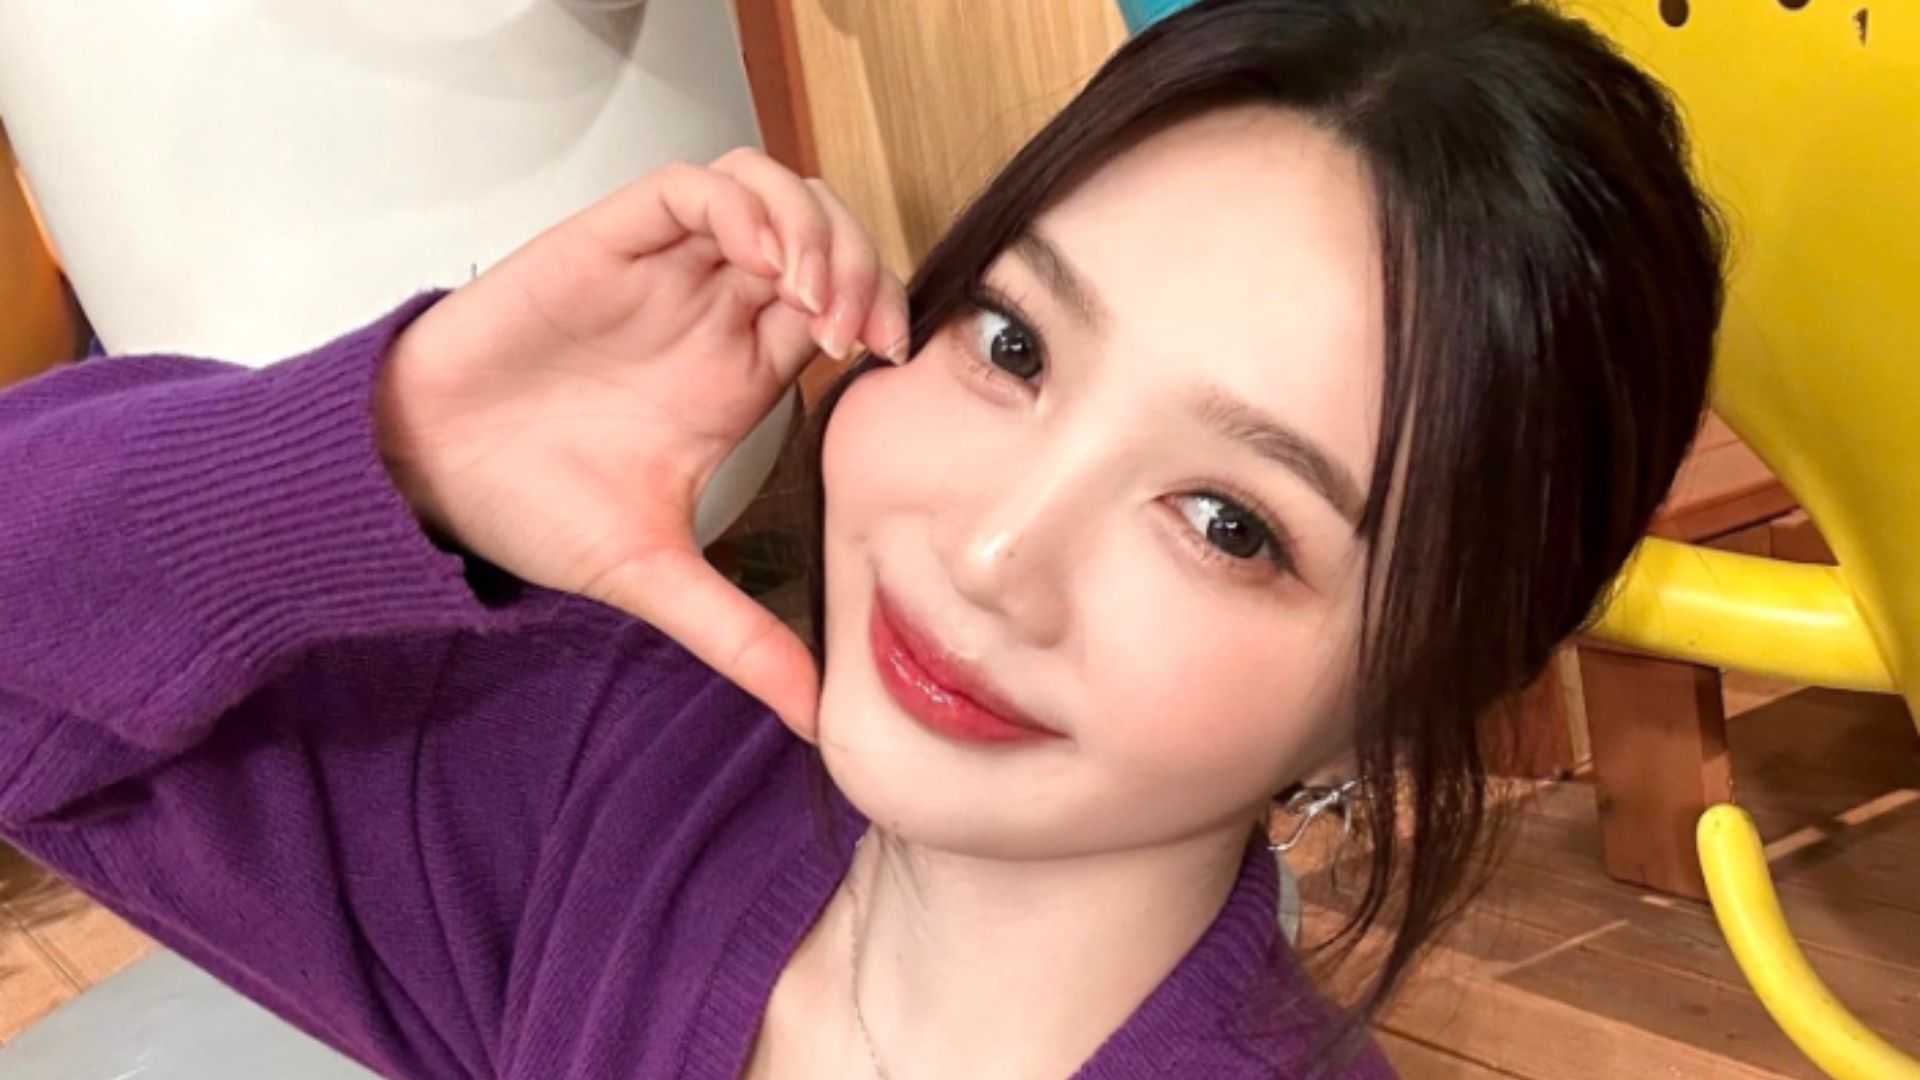 Red Velvet’s Joy on weight comments: ‘I can take care of my own weight’